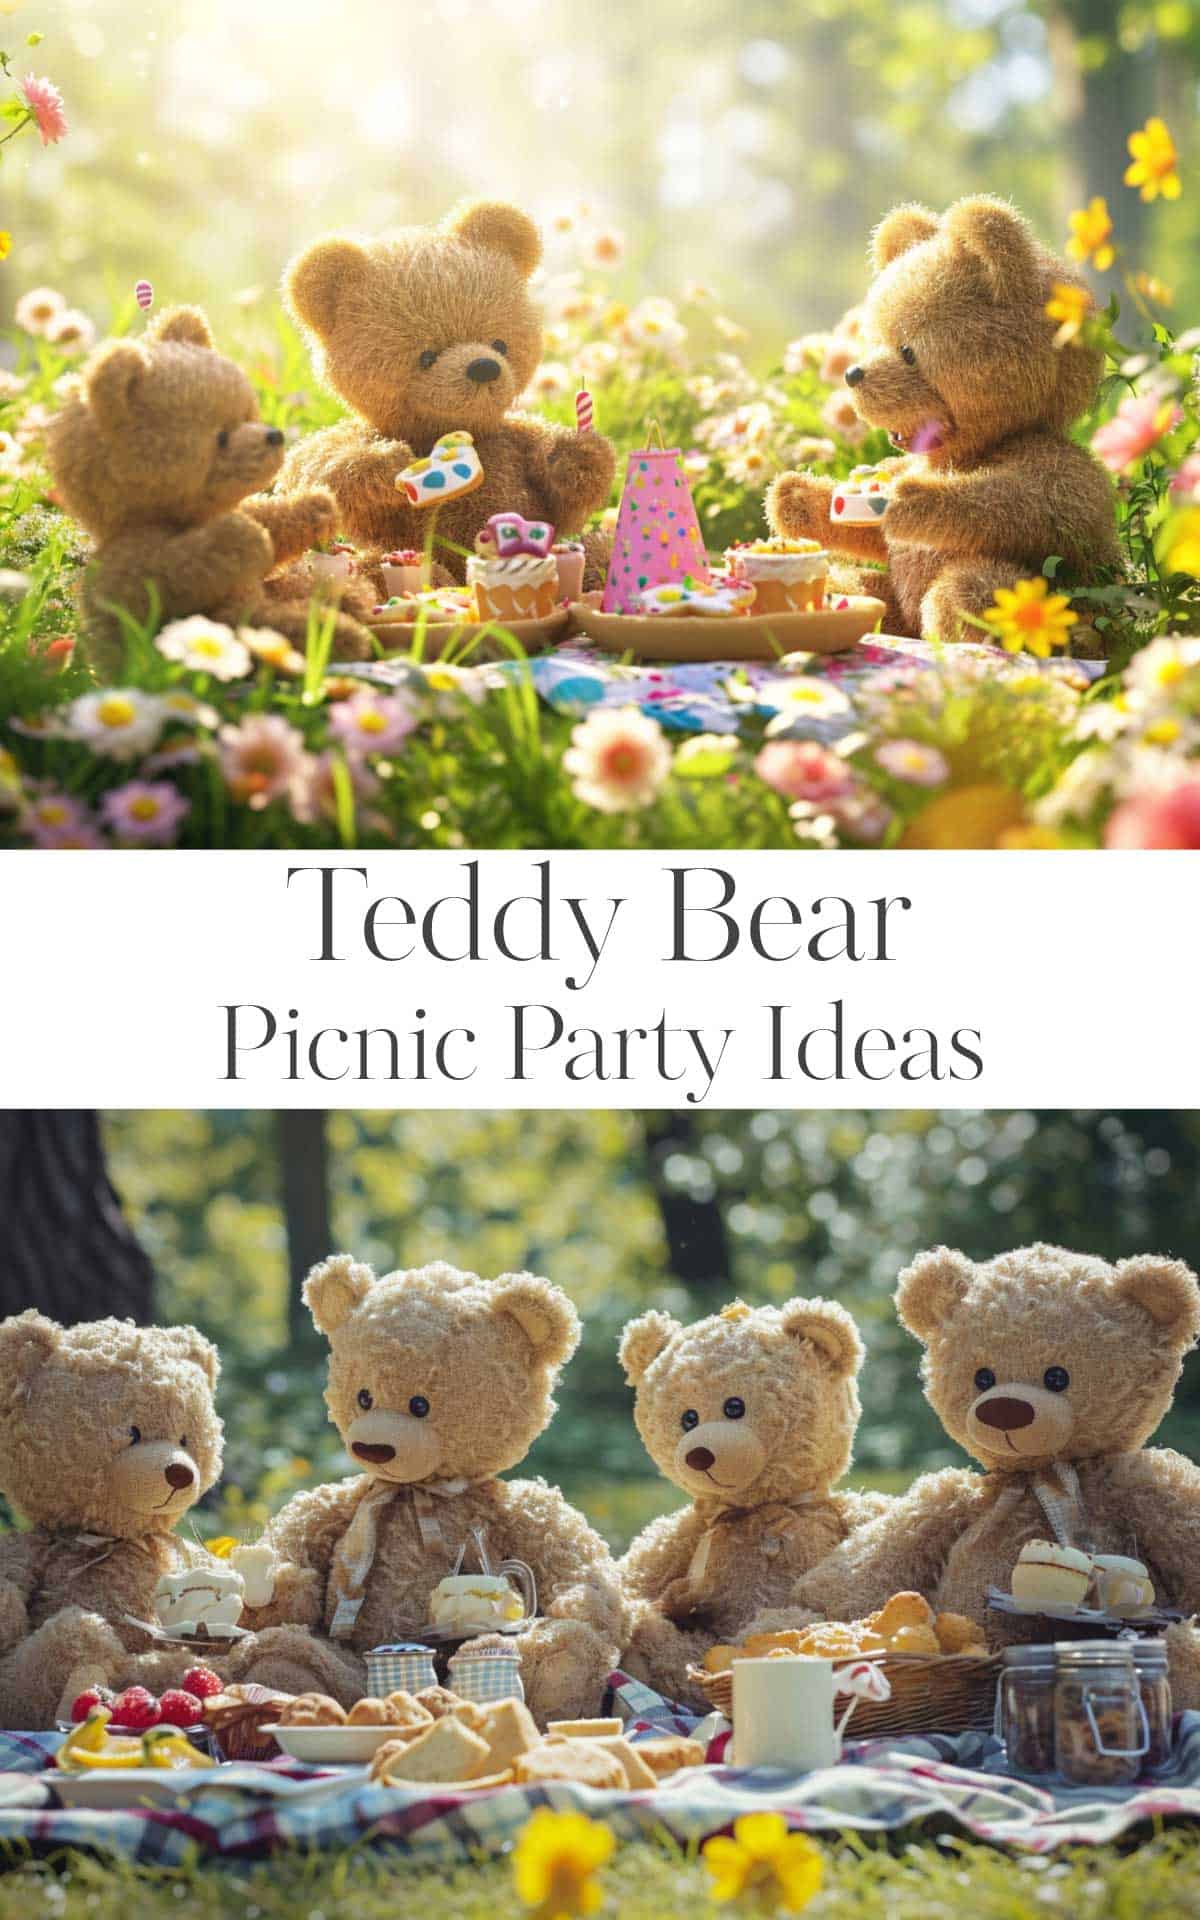 Images of teddy bears having picnic with text overlay "Teddy bear picnic party ideas".